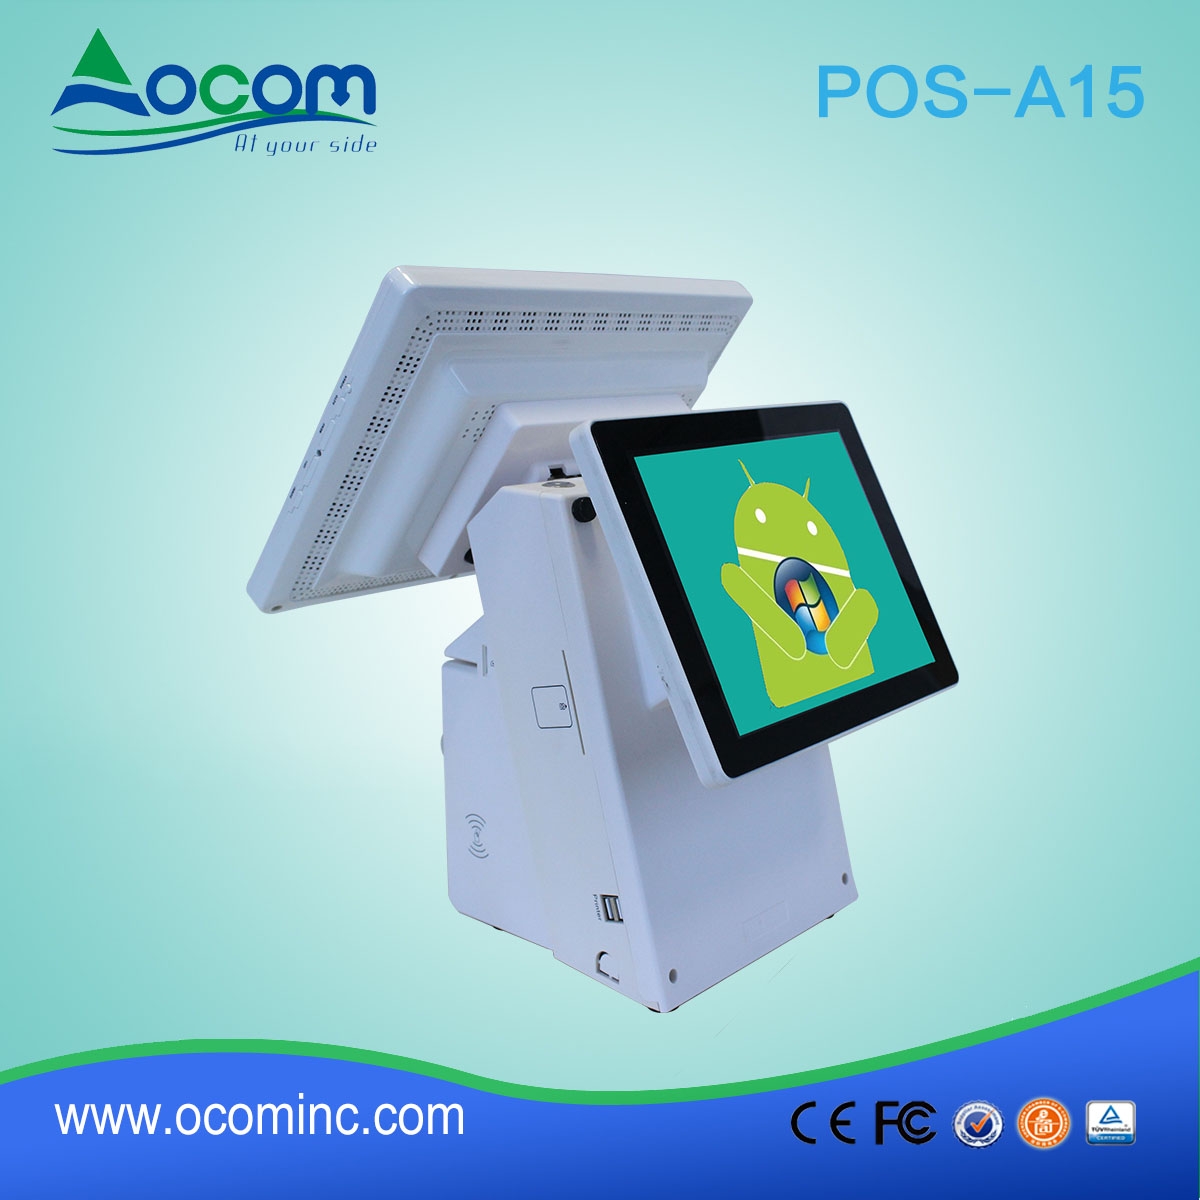 (POS-A15 )All in one Touch Screen POS Terminal With Thermal Printer